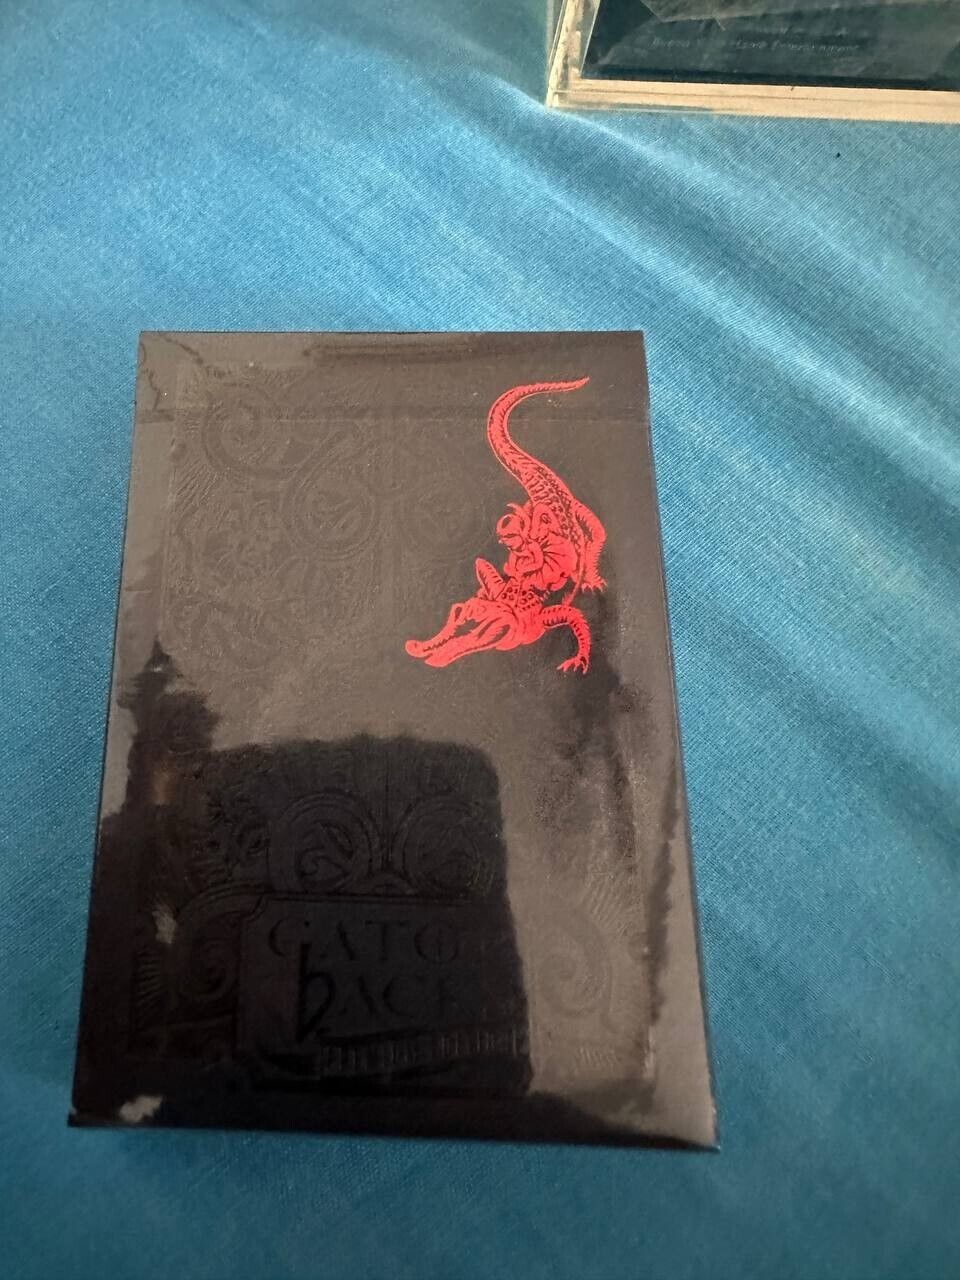 David Blaine Red Gatorbacks playing card deck - EXTREMELY RARE SEALED AND MINT